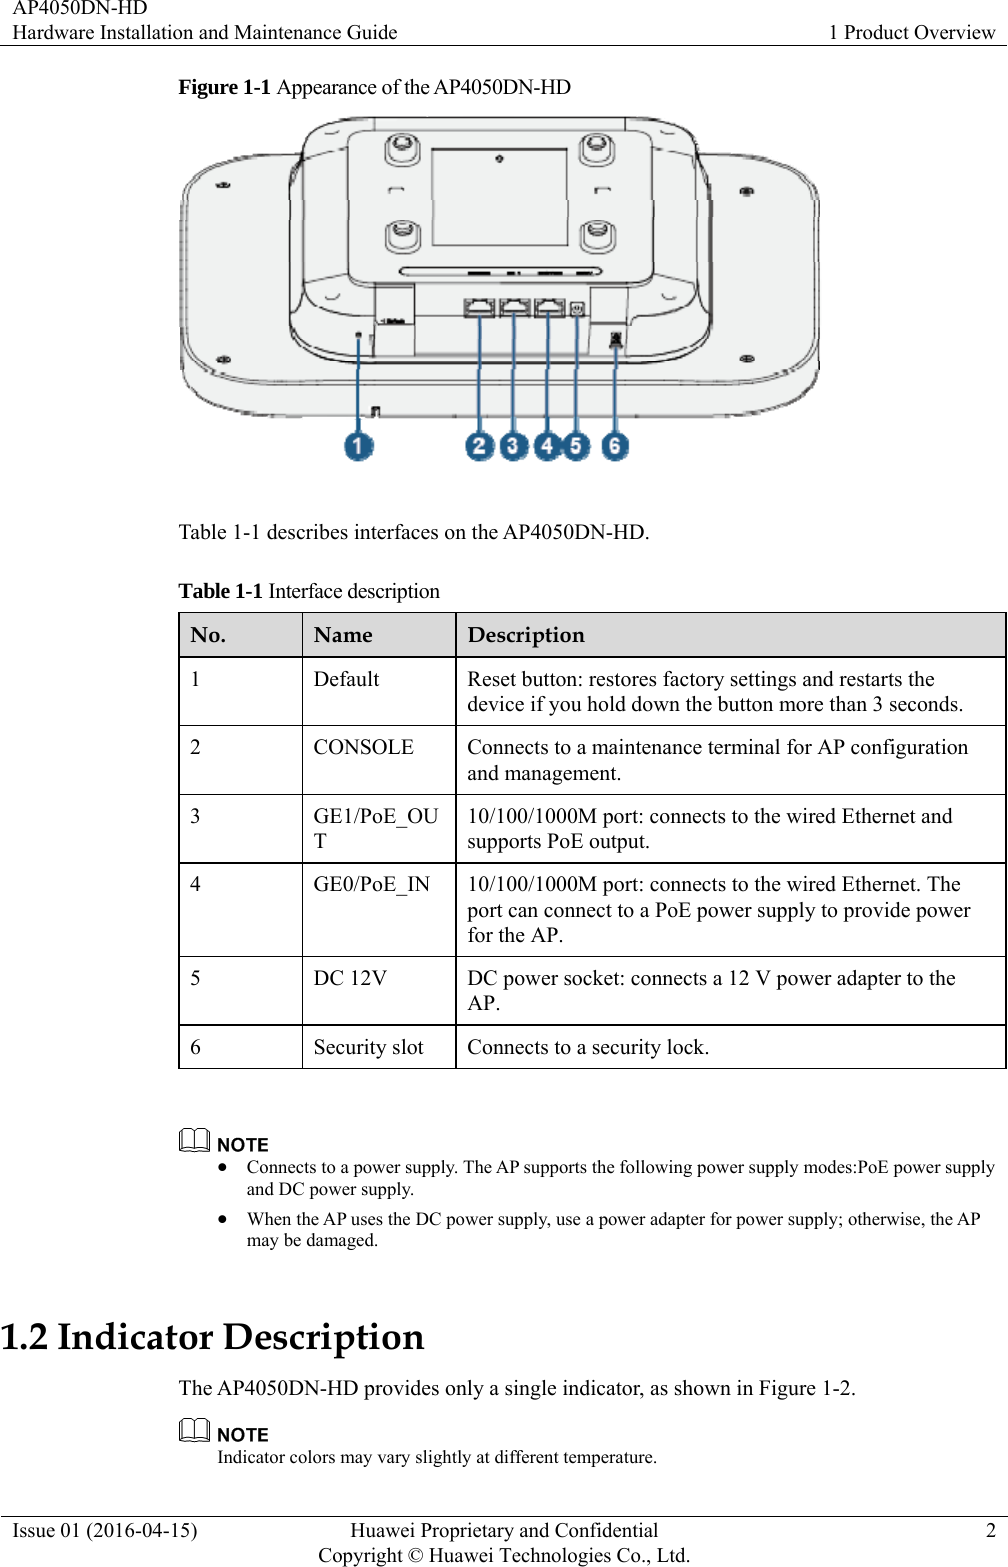 AP4050DN-HD Hardware Installation and Maintenance Guide  1 Product Overview Issue 01 (2016-04-15)  Huawei Proprietary and Confidential         Copyright © Huawei Technologies Co., Ltd.2 Figure 1-1 Appearance of the AP4050DN-HD   Table 1-1 describes interfaces on the AP4050DN-HD. Table 1-1 Interface description No.  Name  Description 1  Default  Reset button: restores factory settings and restarts the device if you hold down the button more than 3 seconds. 2  CONSOLE  Connects to a maintenance terminal for AP configuration and management. 3 GE1/PoE_OUT 10/100/1000M port: connects to the wired Ethernet and supports PoE output. 4  GE0/PoE_IN  10/100/1000M port: connects to the wired Ethernet. The port can connect to a PoE power supply to provide power for the AP. 5  DC 12V  DC power socket: connects a 12 V power adapter to the AP. 6  Security slot  Connects to a security lock.    Connects to a power supply. The AP supports the following power supply modes:PoE power supply and DC power supply.  When the AP uses the DC power supply, use a power adapter for power supply; otherwise, the AP may be damaged. 1.2 Indicator Description The AP4050DN-HD provides only a single indicator, as shown in Figure 1-2.  Indicator colors may vary slightly at different temperature. 